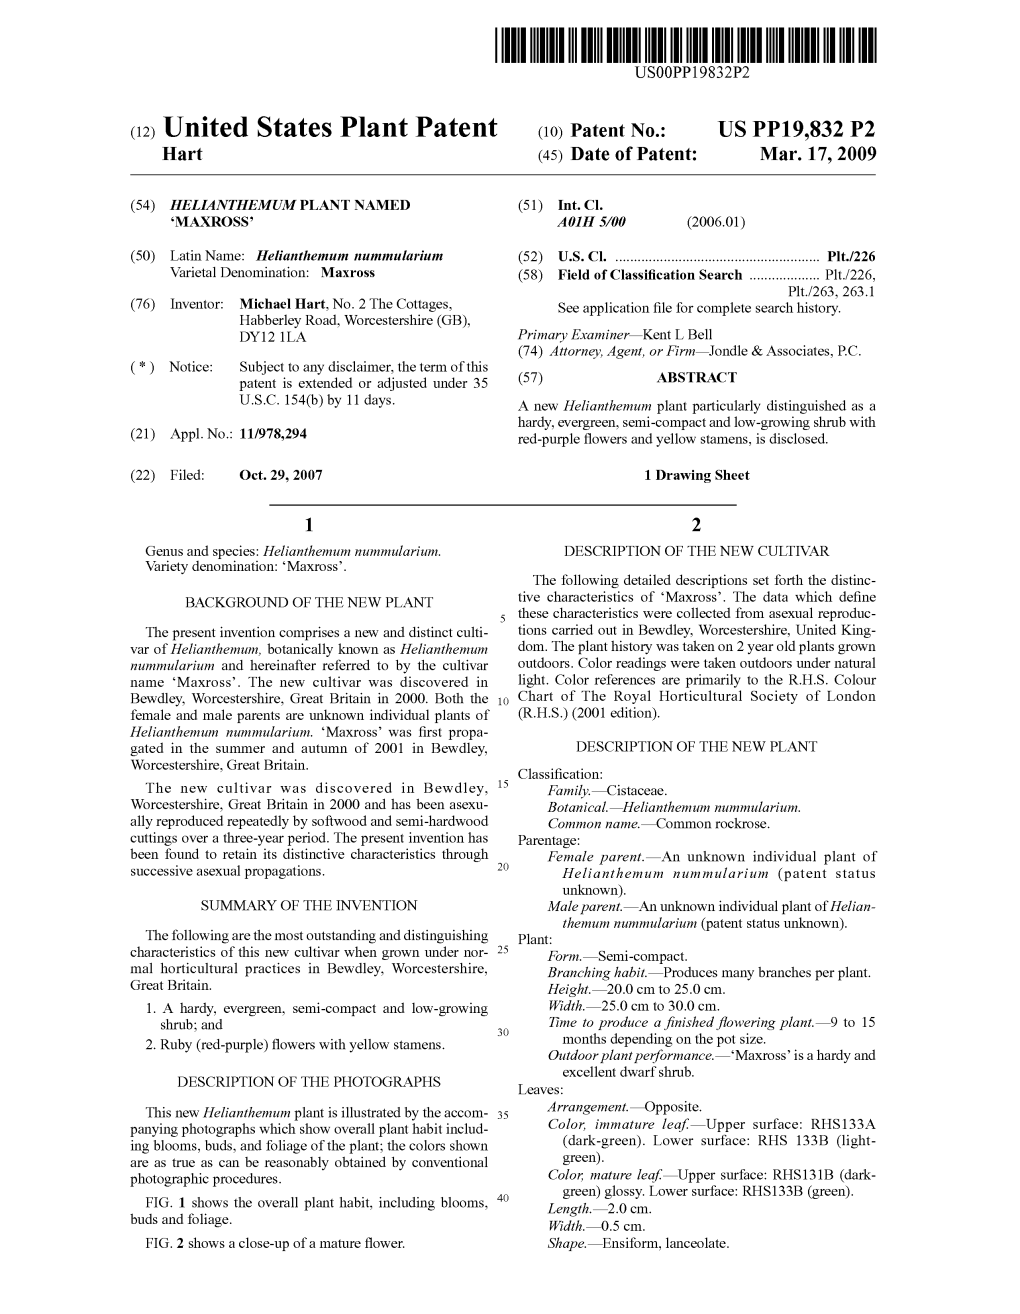 (12) United States Plant Patent (10) Patent No.: US PP19,832 P2 Hart (45) Date of Patent: Mar